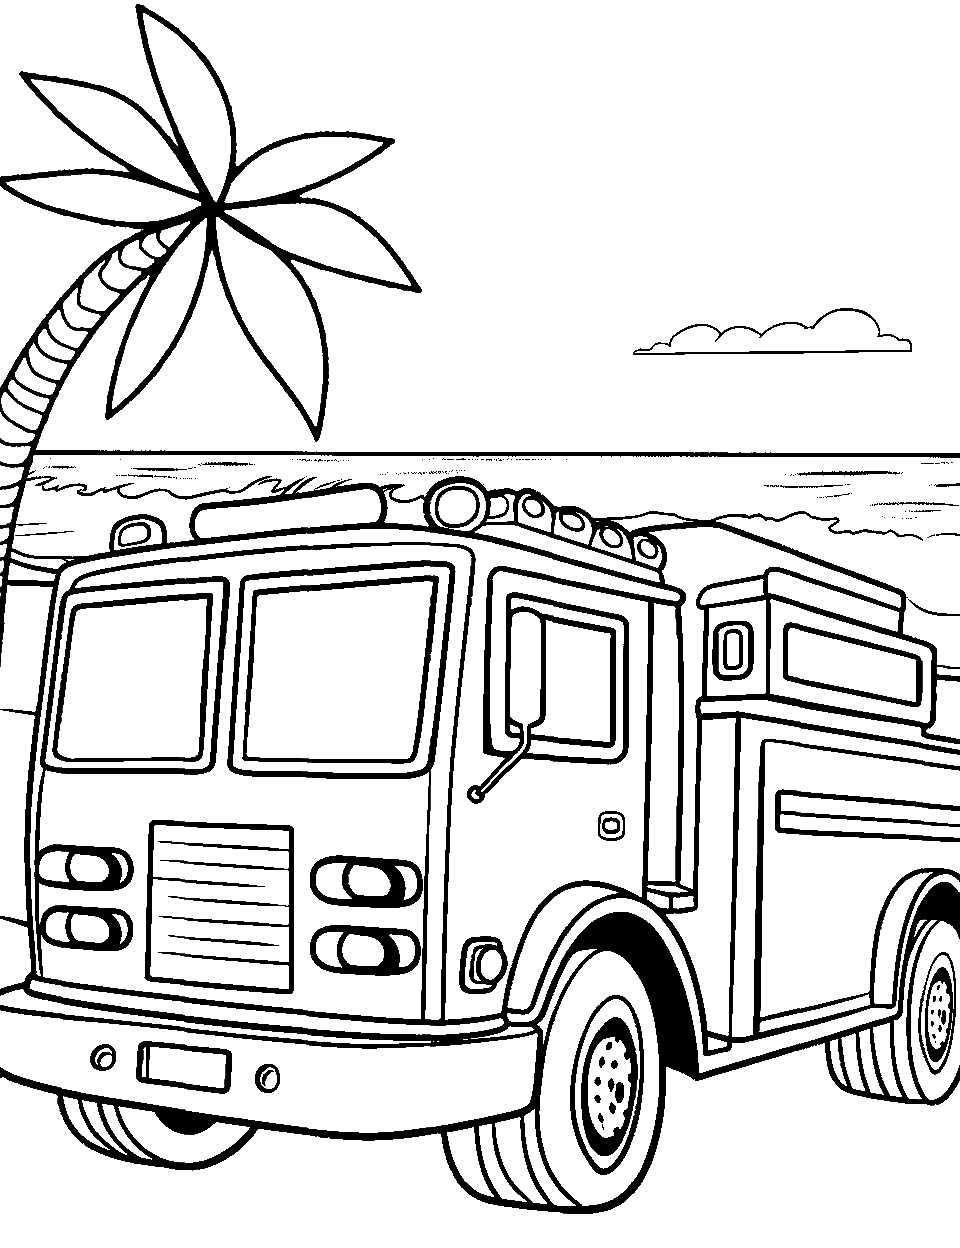 Ocean Side Fire Rescue Truck Coloring Page - A fire truck near the beach, with the ocean in the background.